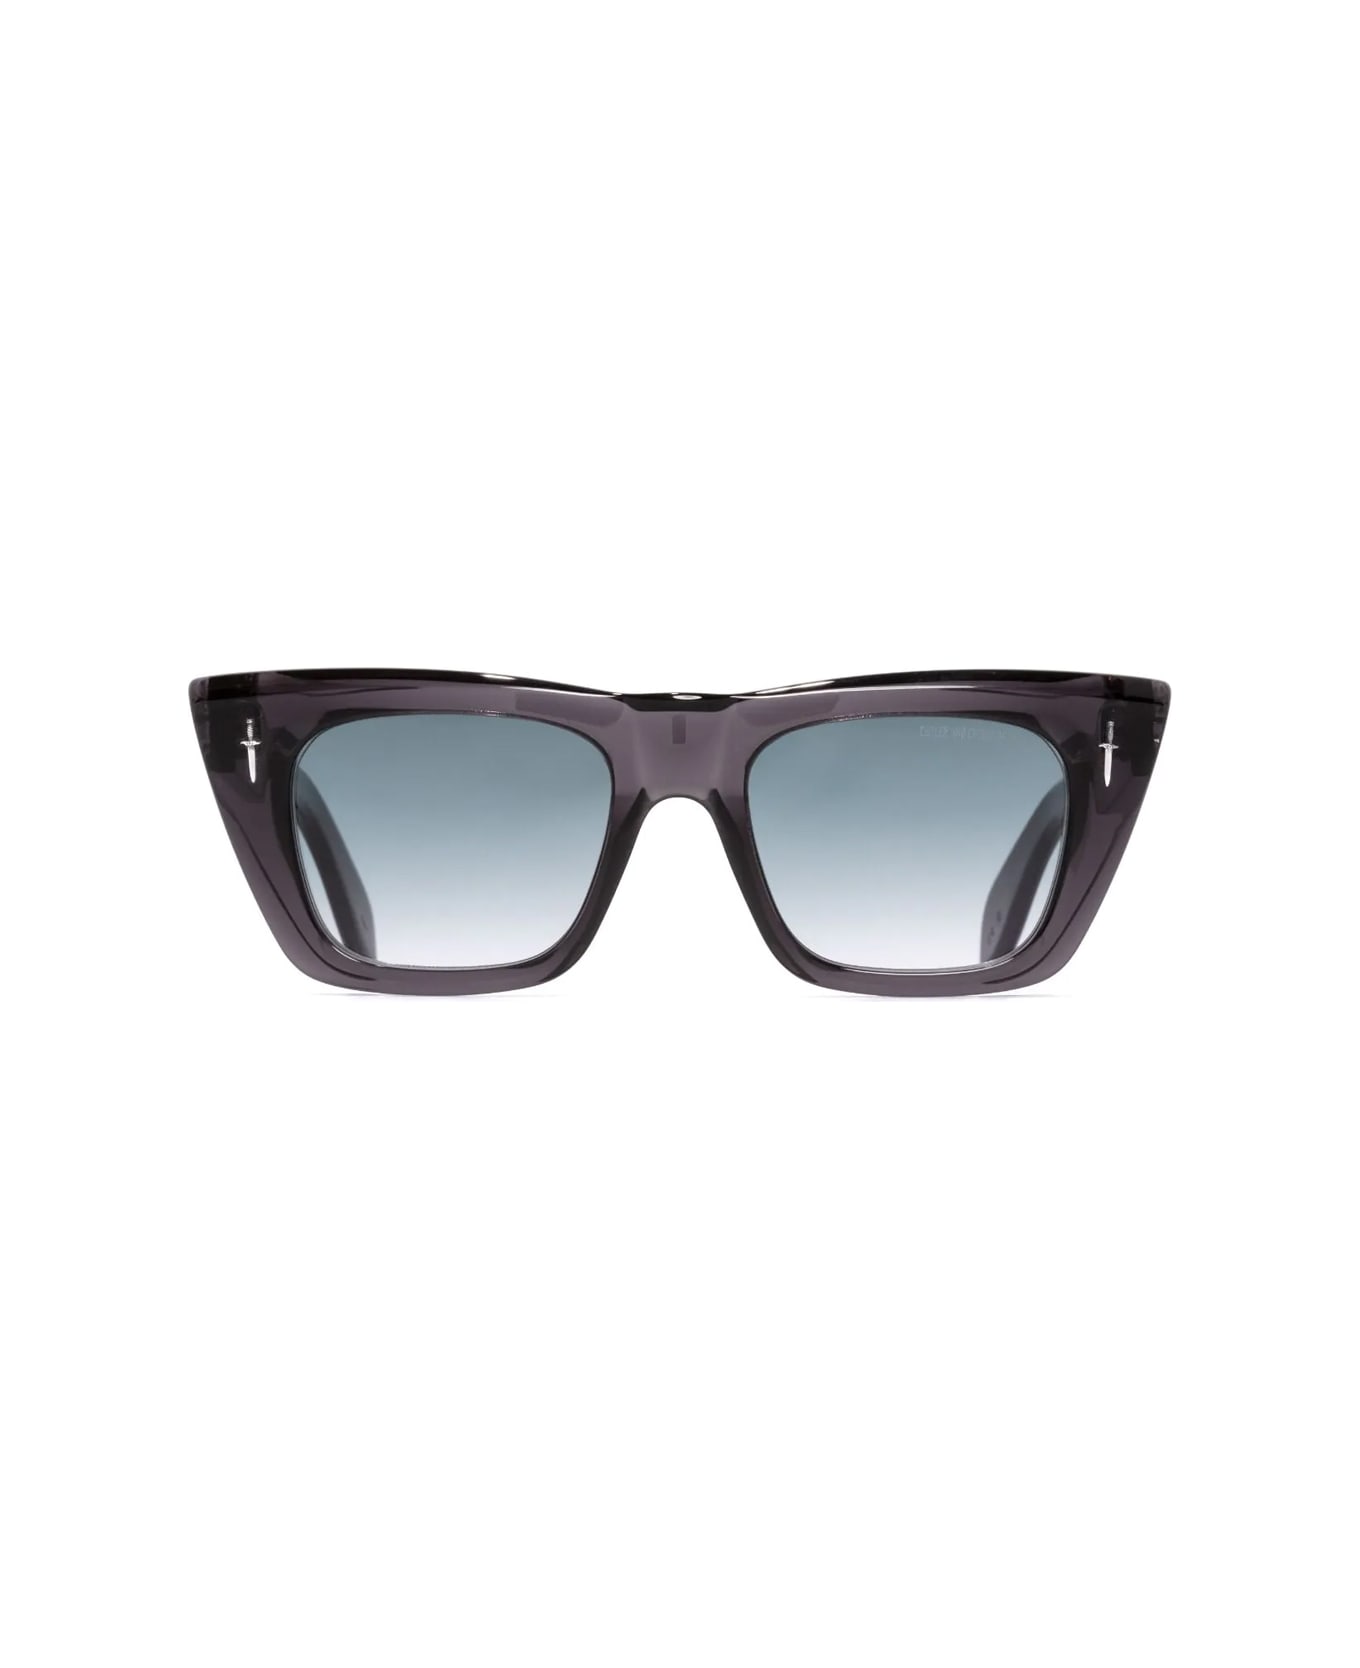 Cutler and Gross The Great Frog 008 03 Sunglasses - Grigio サングラス